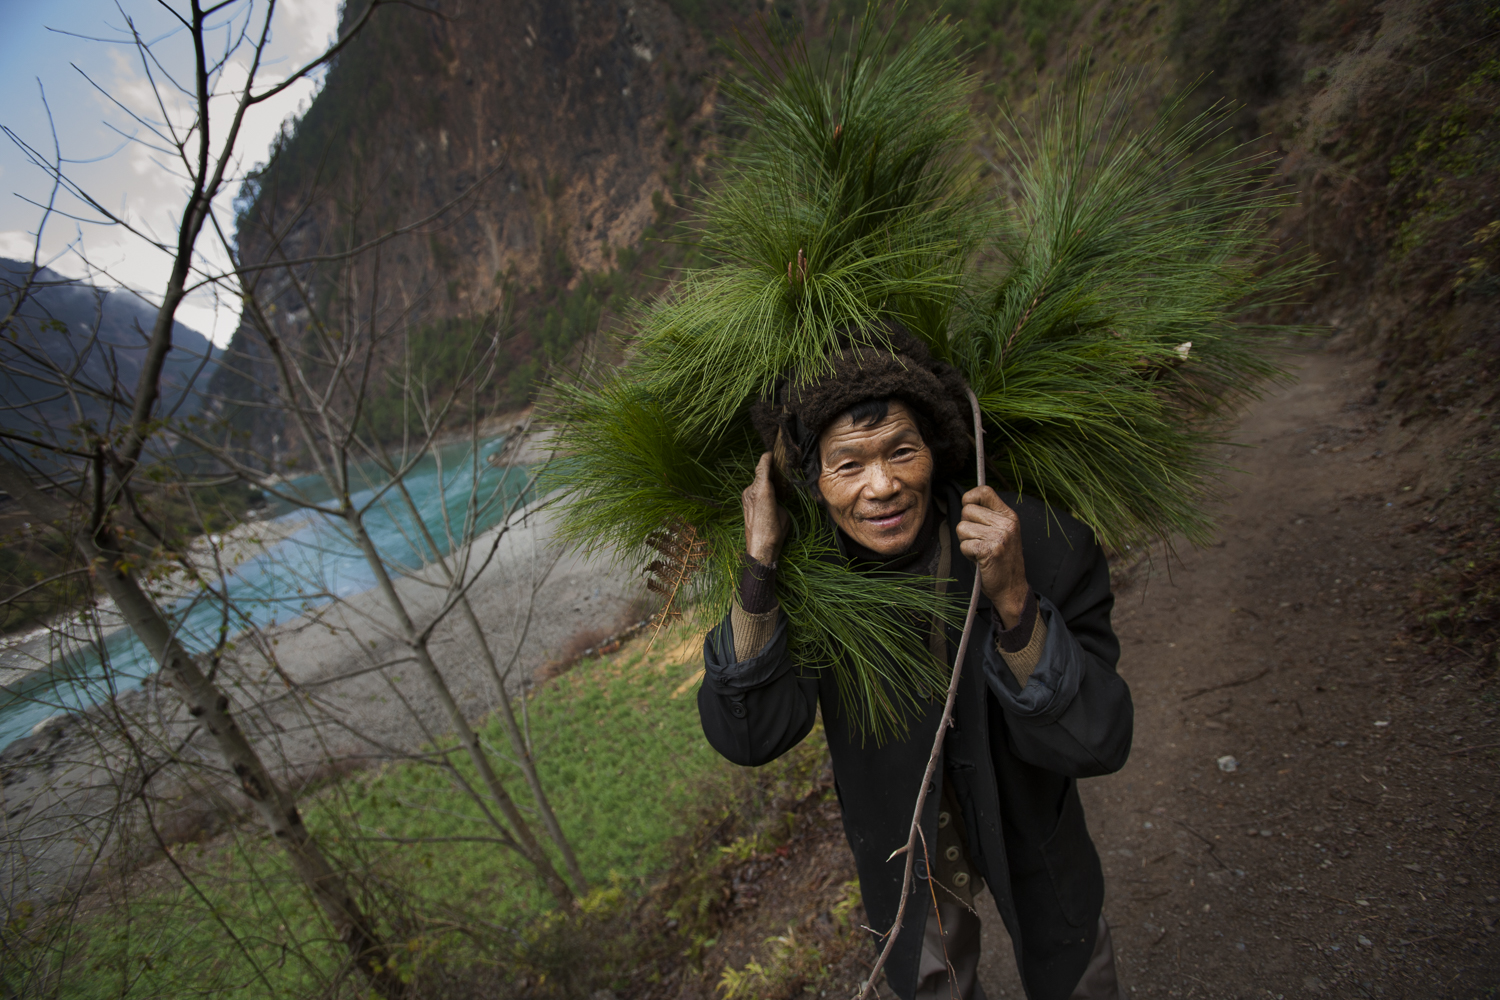  Wuli, Yunnan. A Tibetan man gathers pine needles for Buddhist rituals.&nbsp; While many Tibetans in this region have converted to Christianity they still maintain some of their traditional culture.&nbsp; The pines needles are put around Buddhist shr